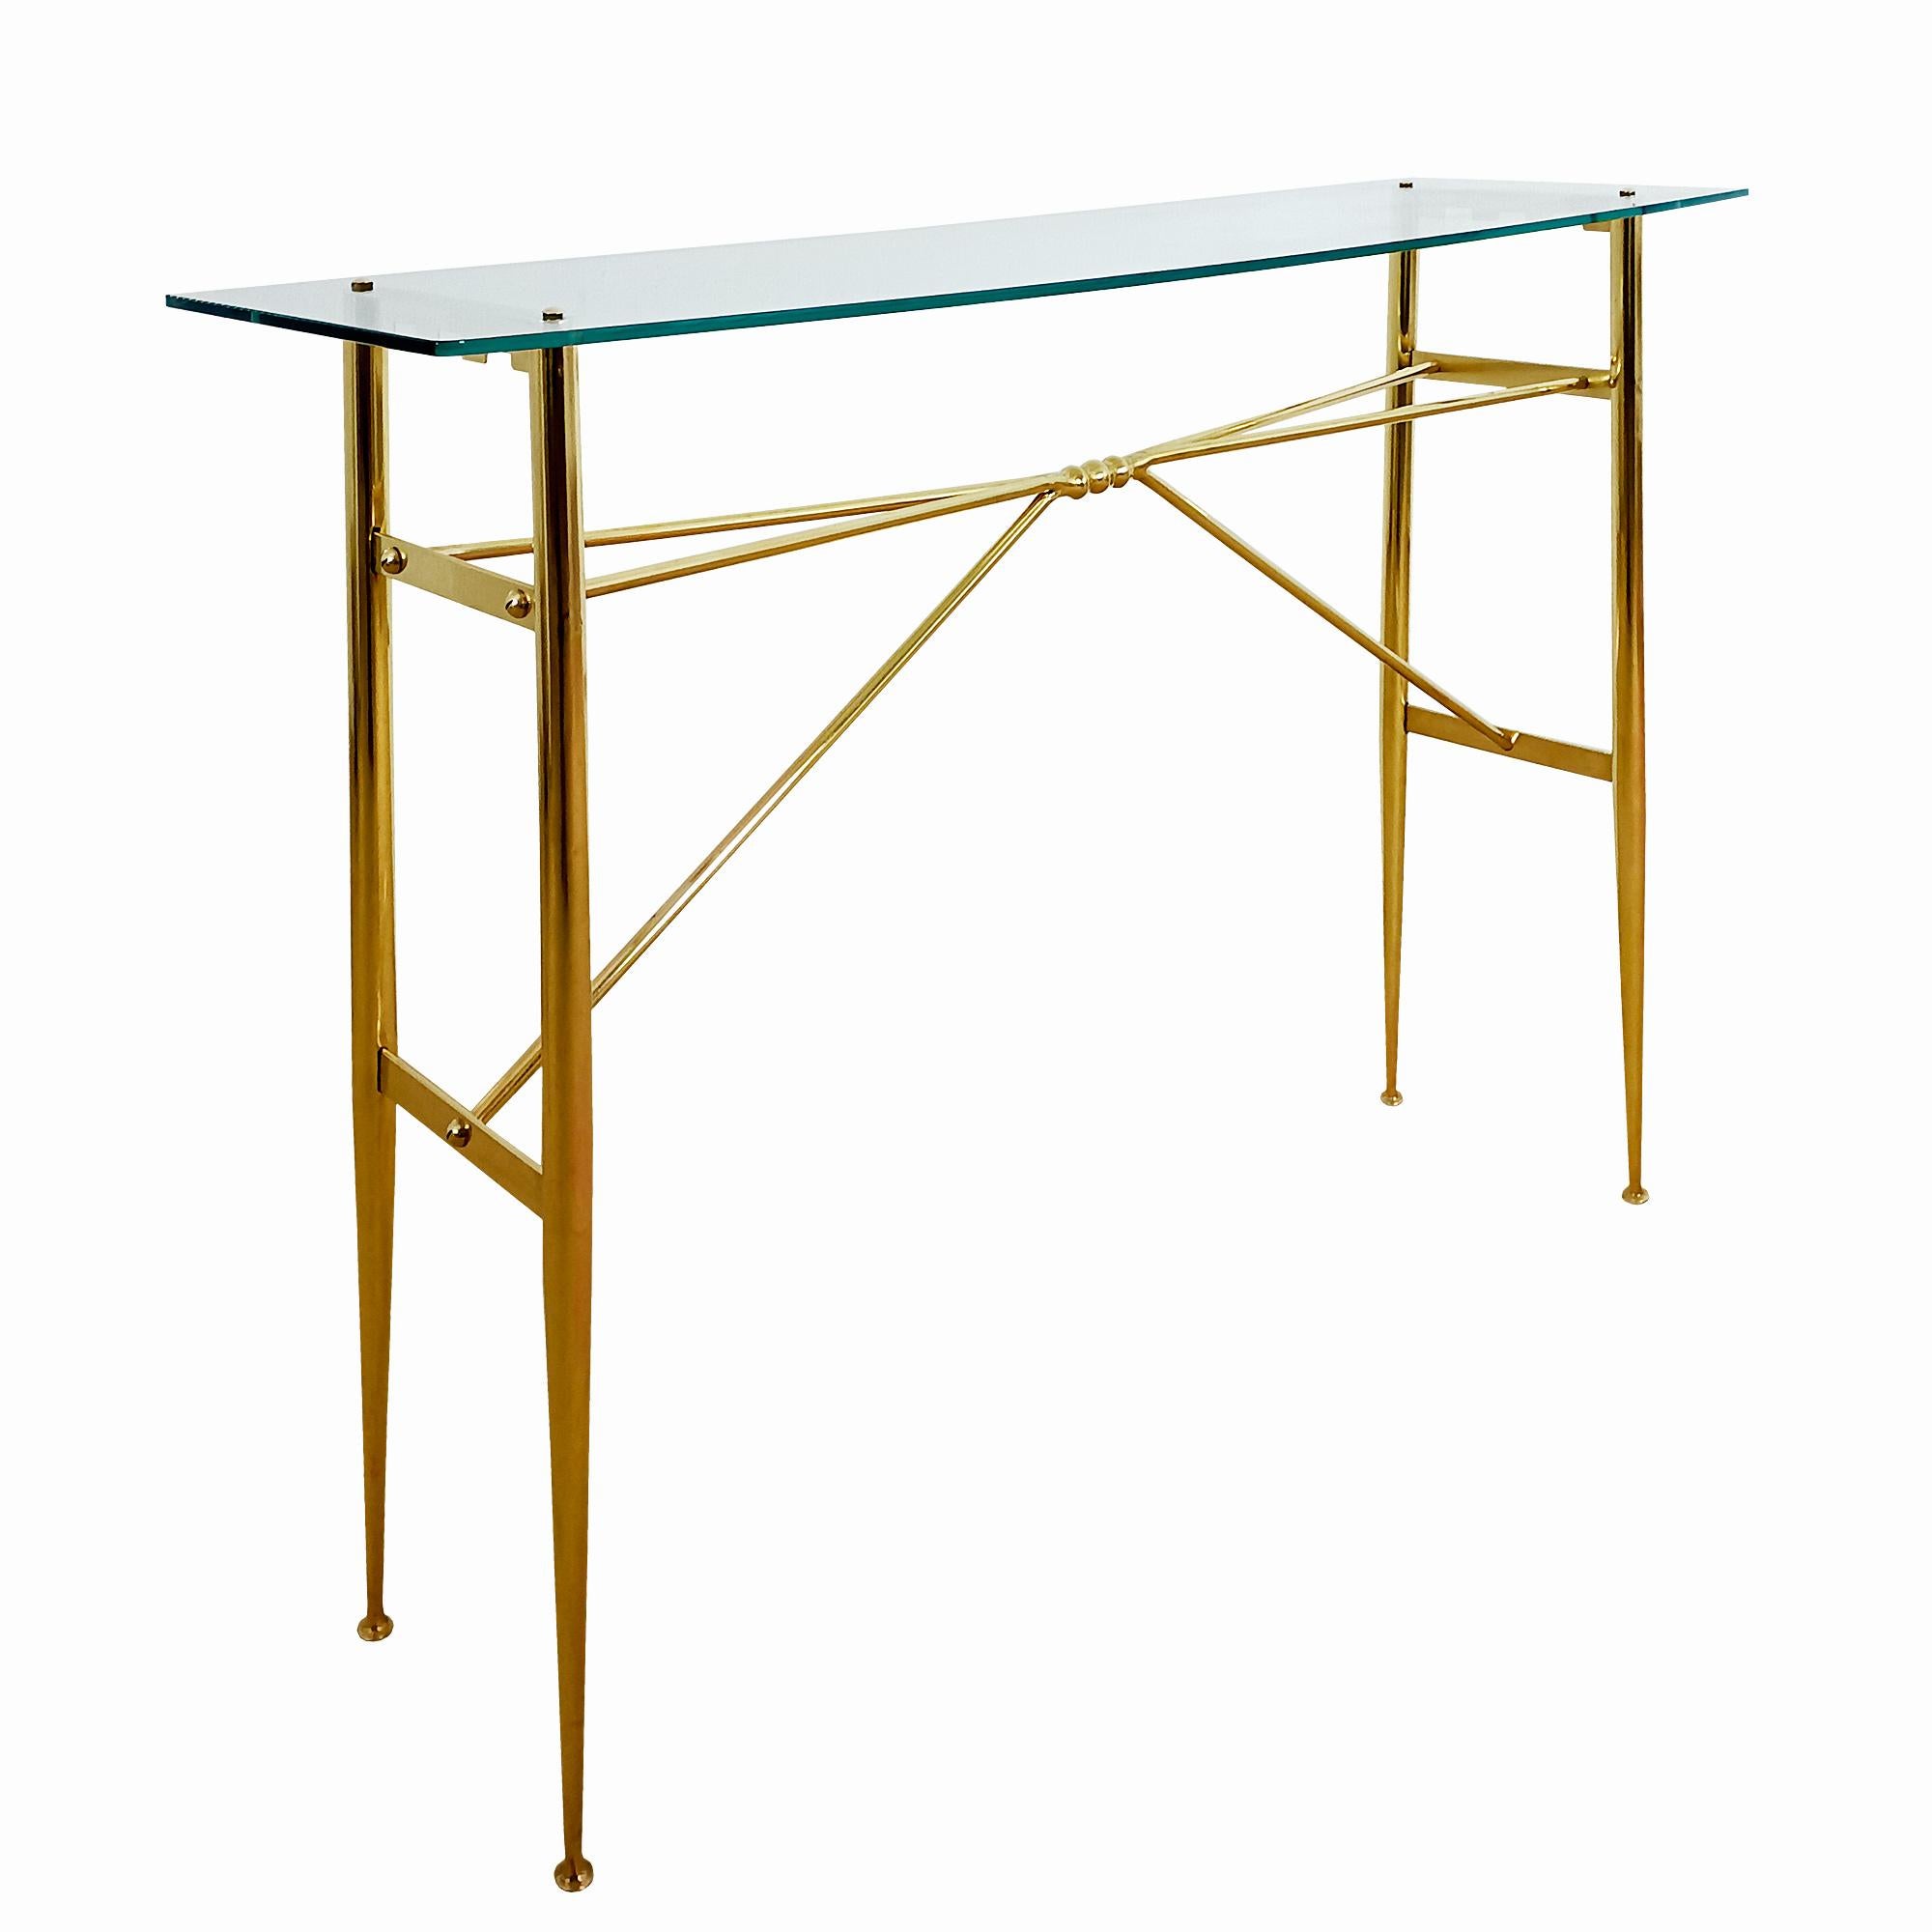 Console with solid polished brass strut and glass shelf. Completely removable. Great manufacturing quality.
Italy circa 1950.